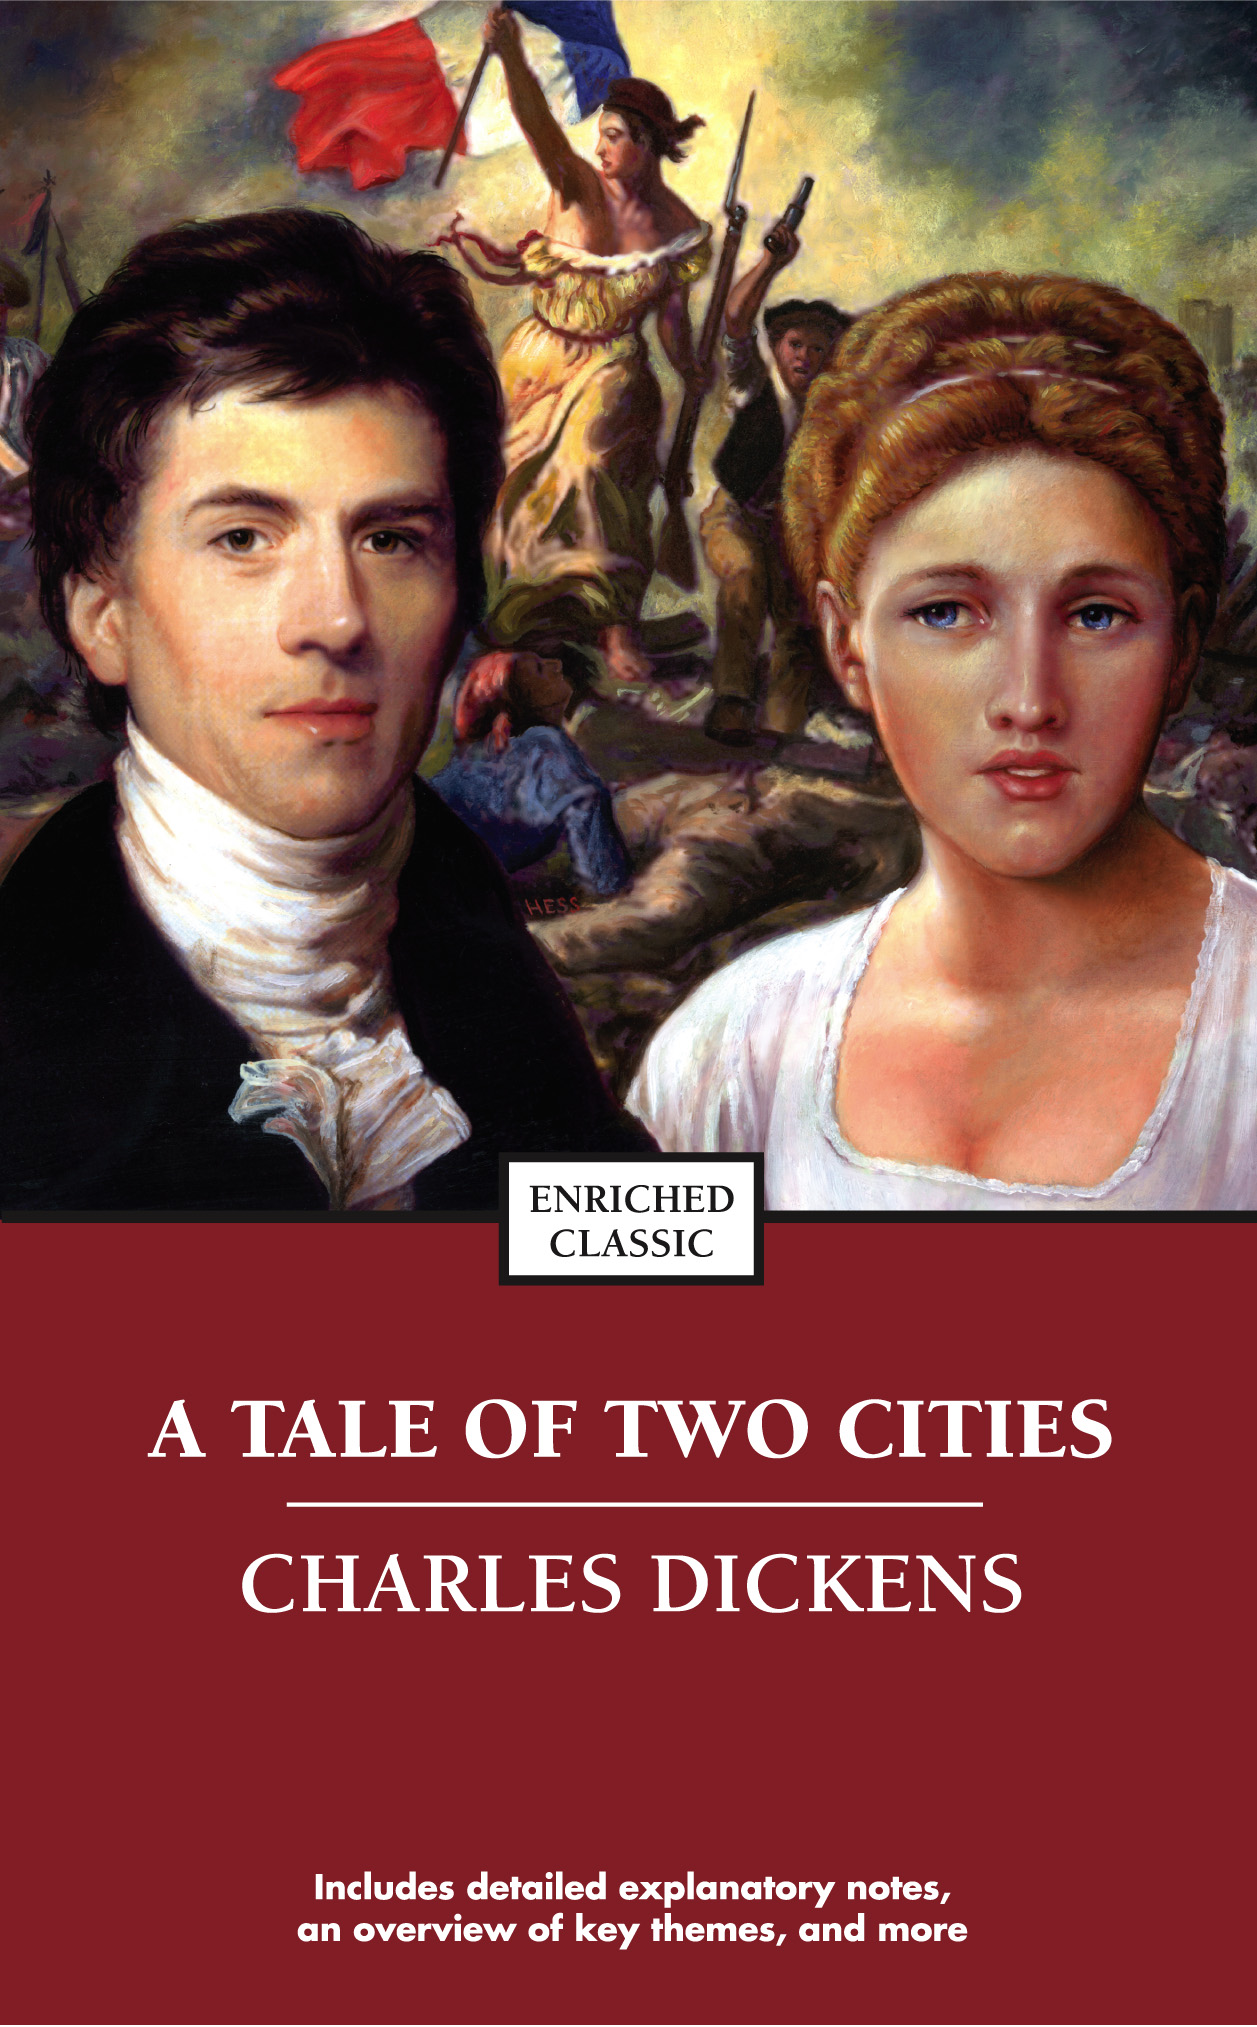 A Tale of Two Cities: Love, Loss & Revolution in Dickensian London & Paris